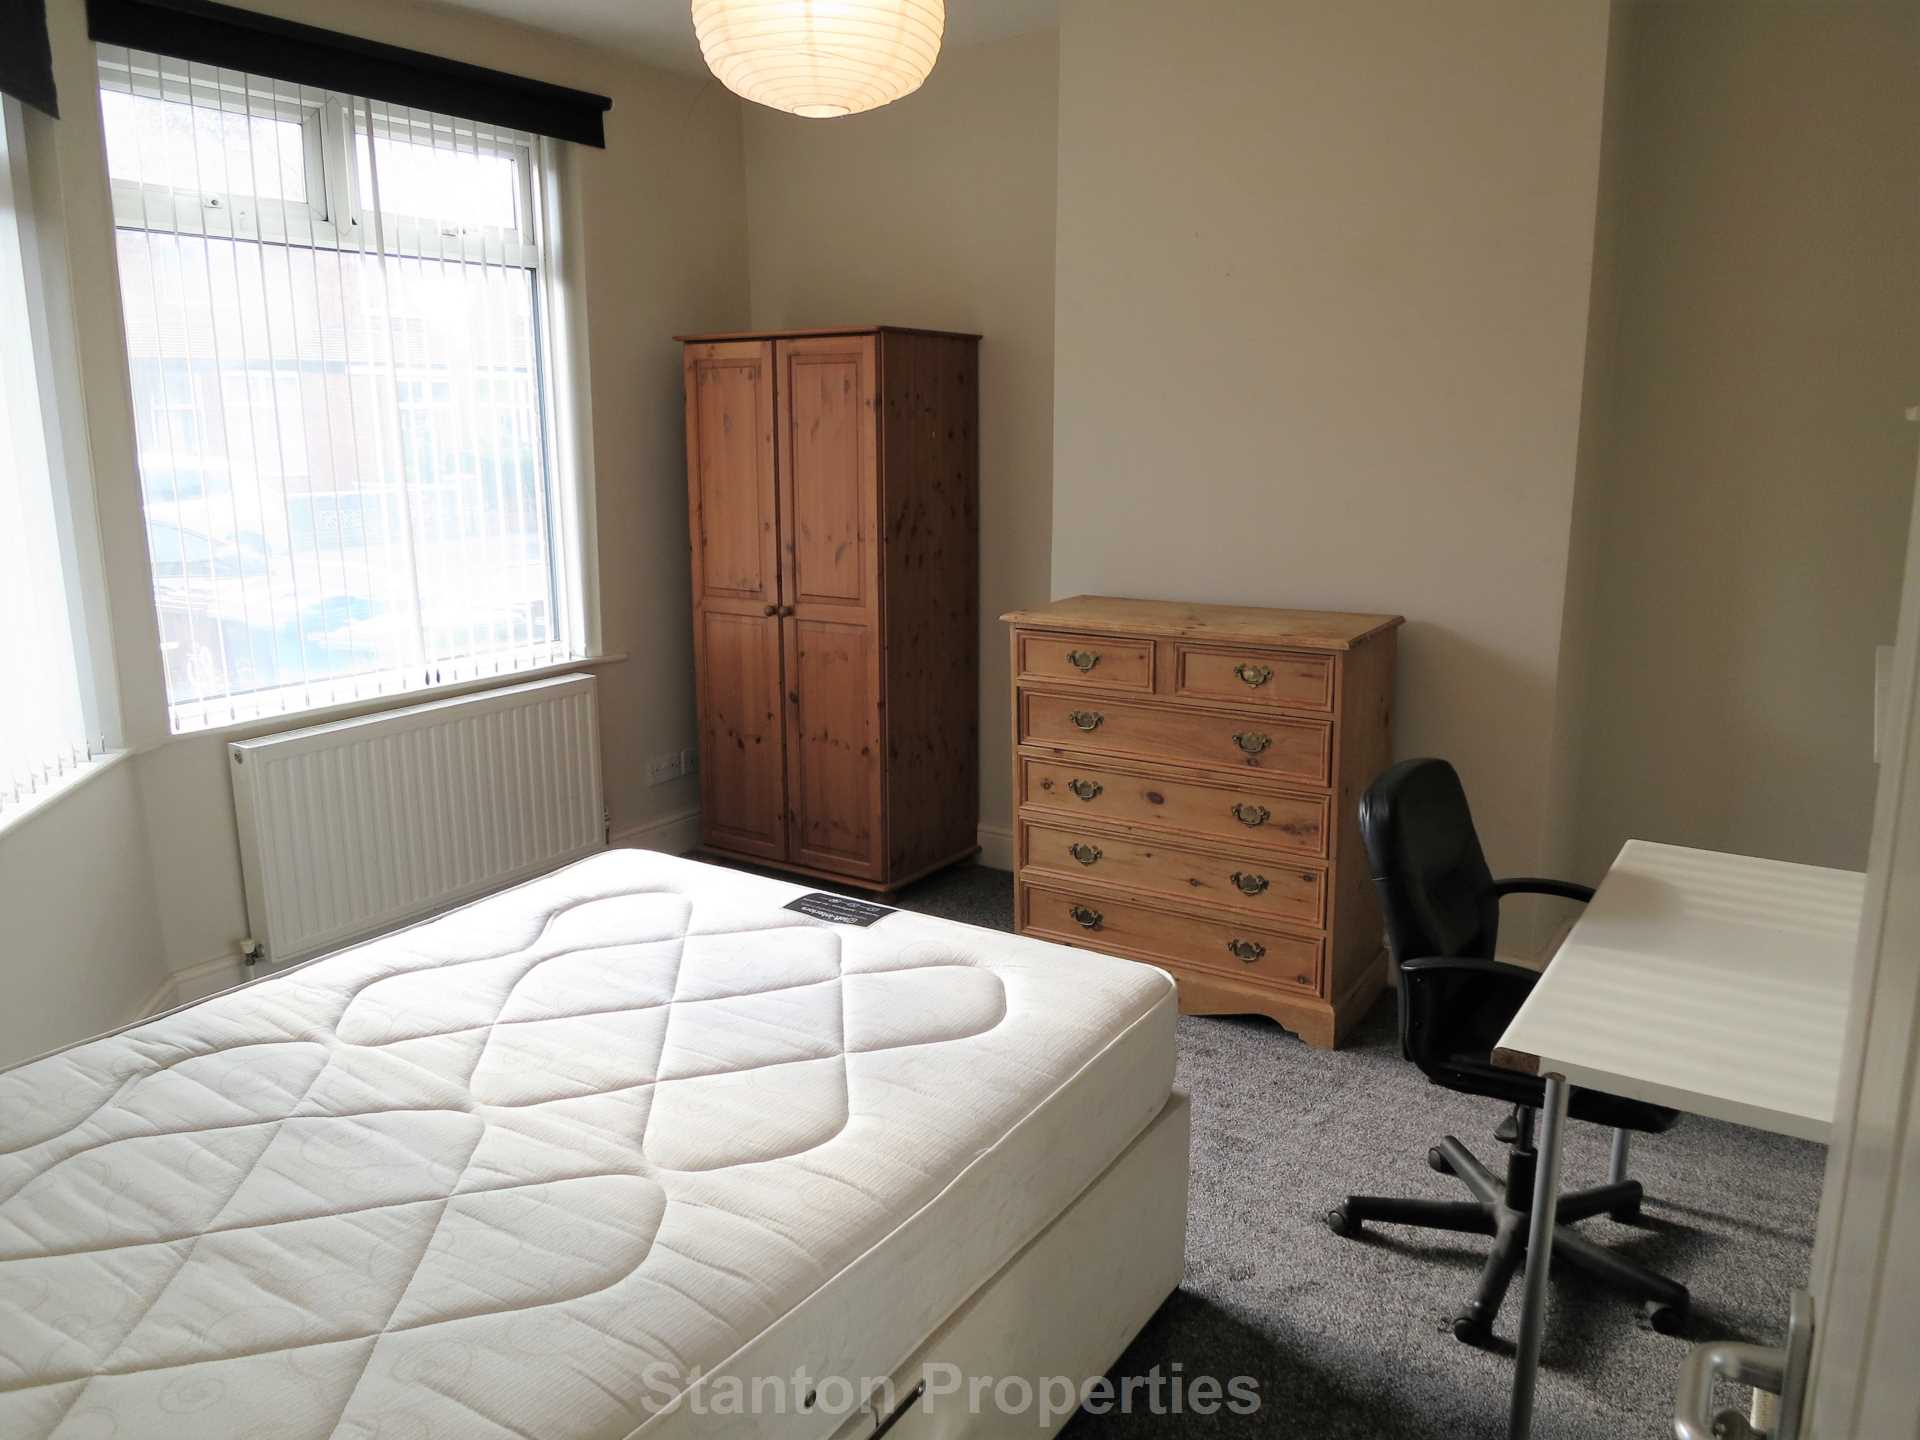 See Video Tour, £135 pppw, Brocklebank Road, Fallowfield, Image 8